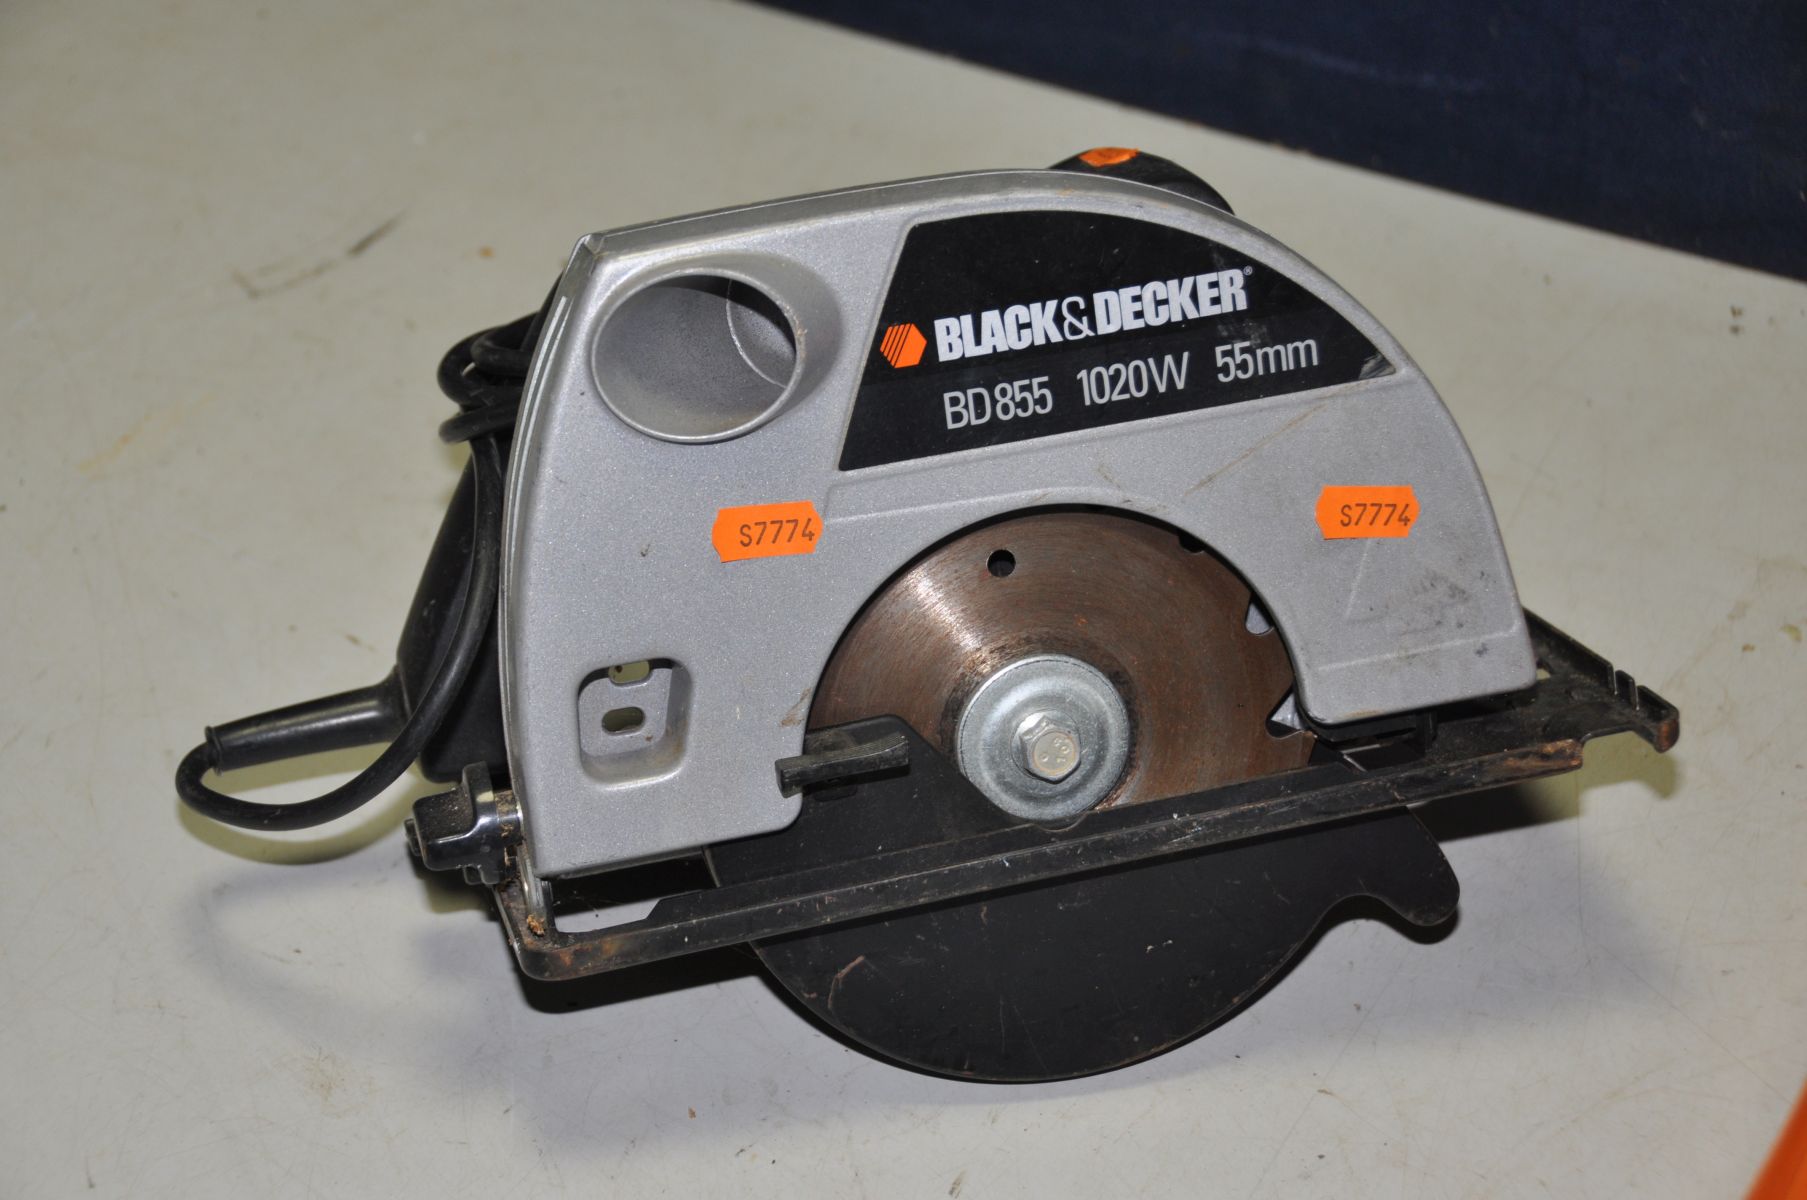 A SFS Di600 110V SCREW GUN in box (no PAT but working) and a Black and Decker BD855 Circular Saw - Image 2 of 3